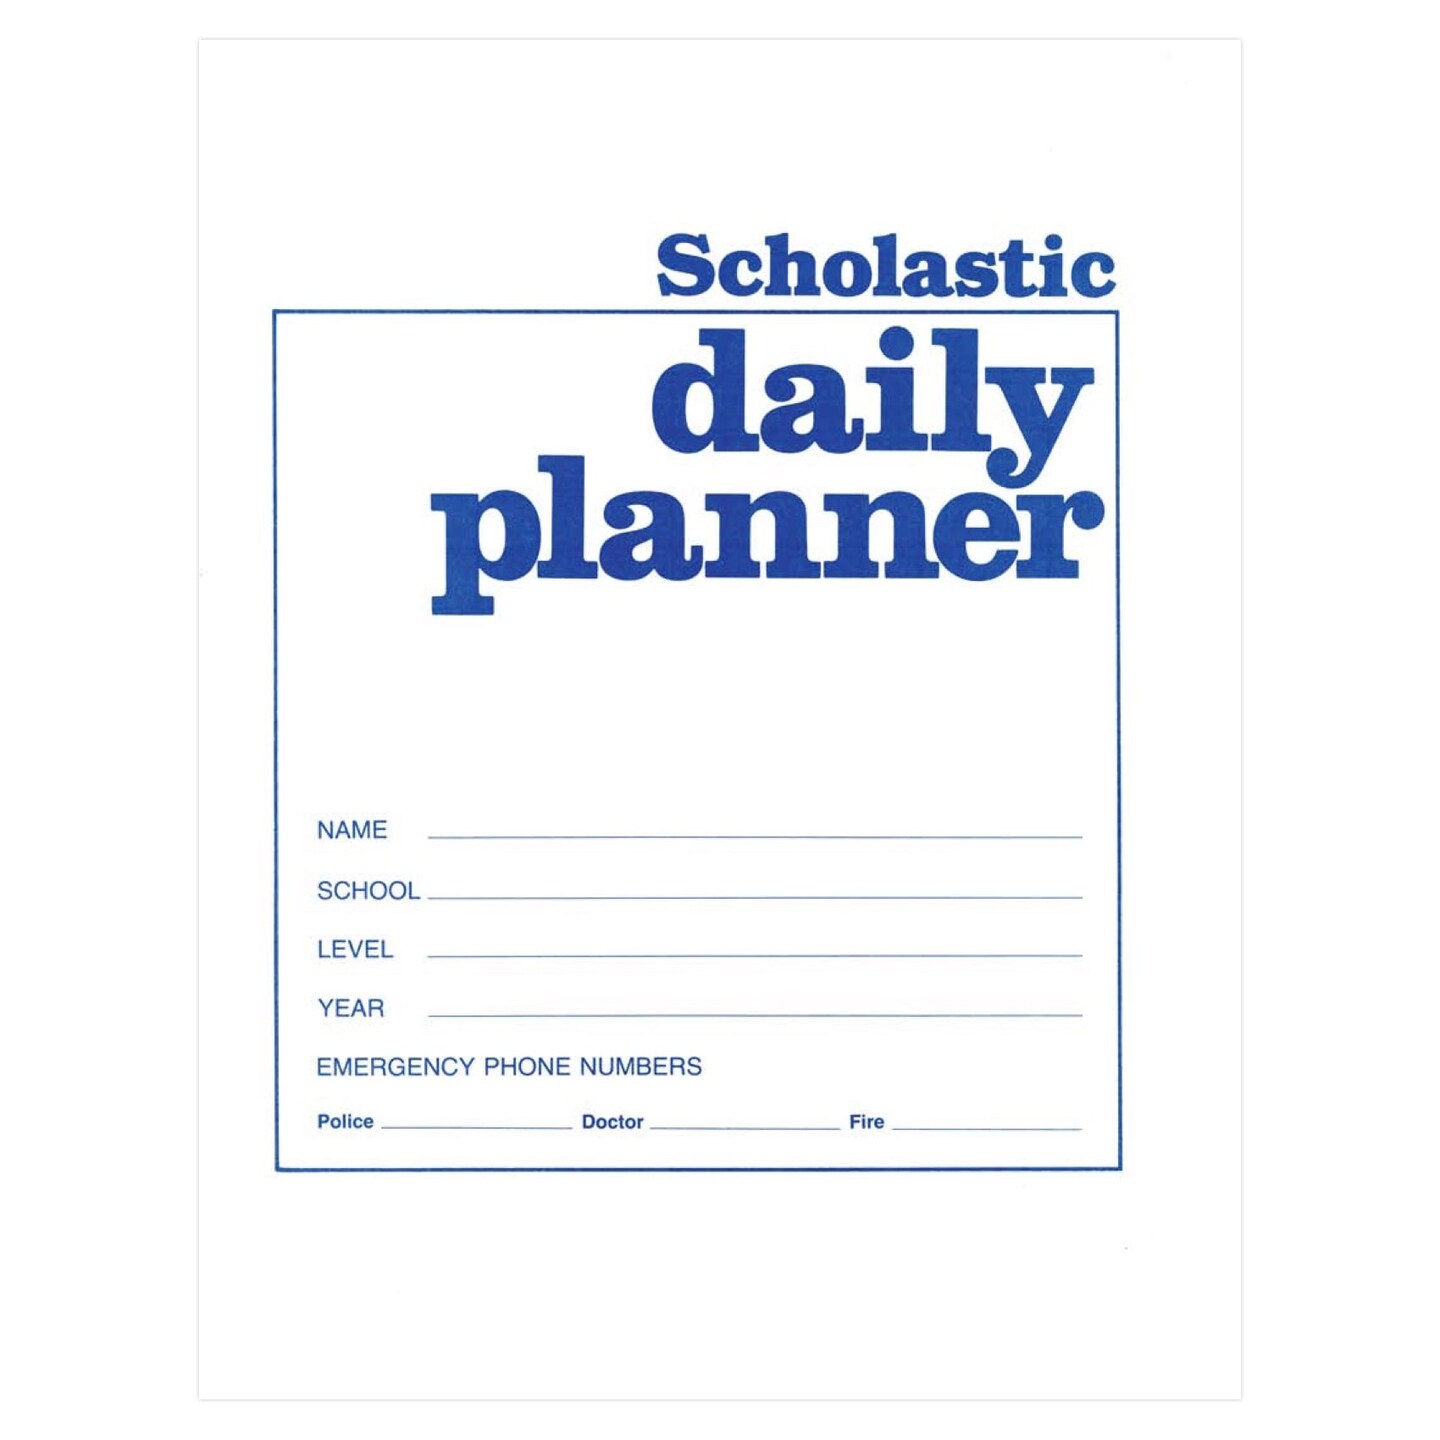 Scholastic Daily Planner, Pack of 3